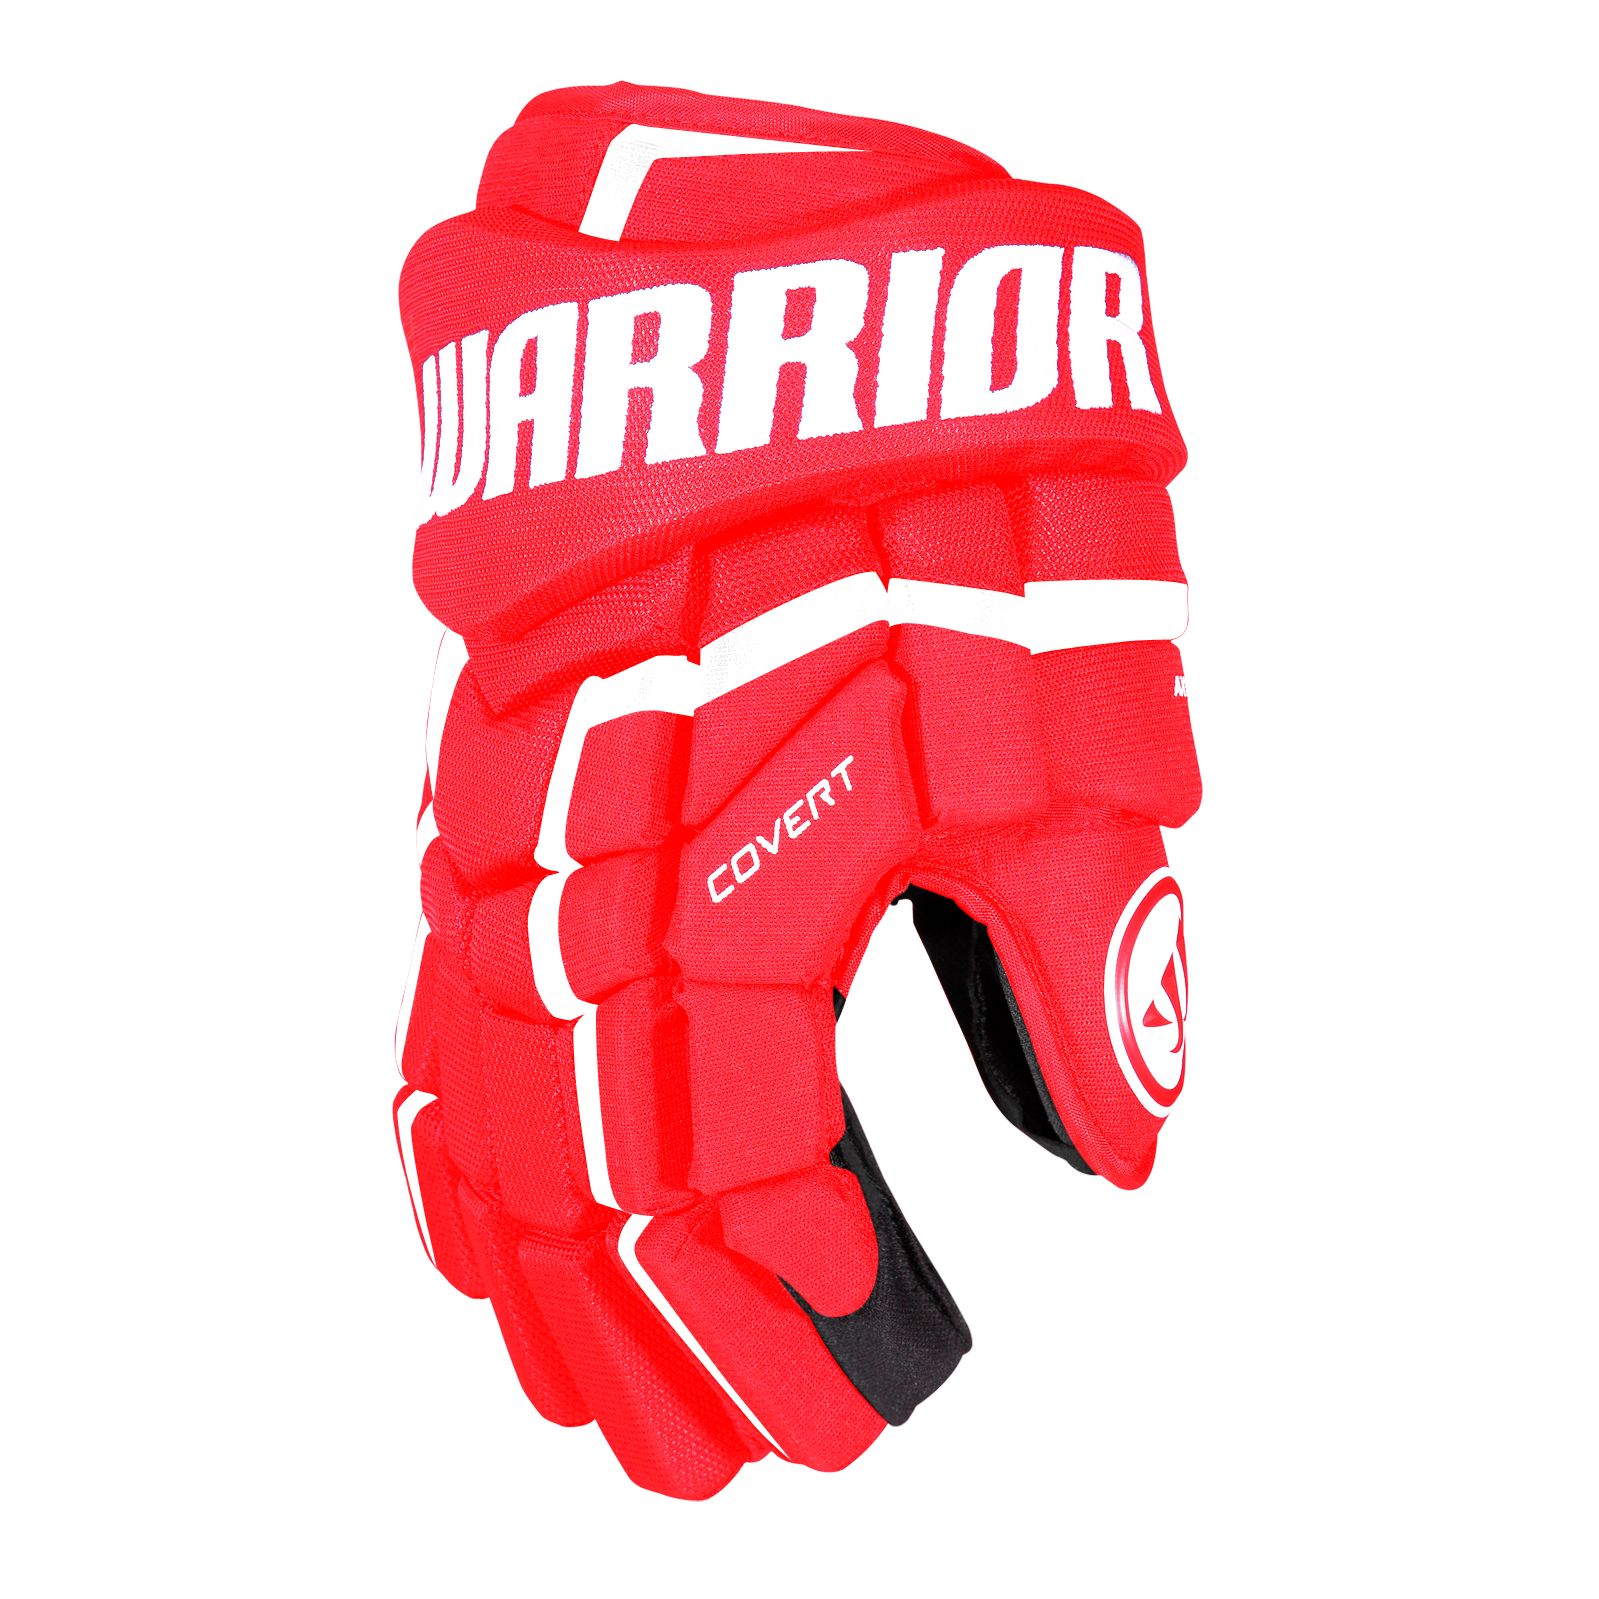 Covert QRL4 Sr. Glove , Red with White image number 0